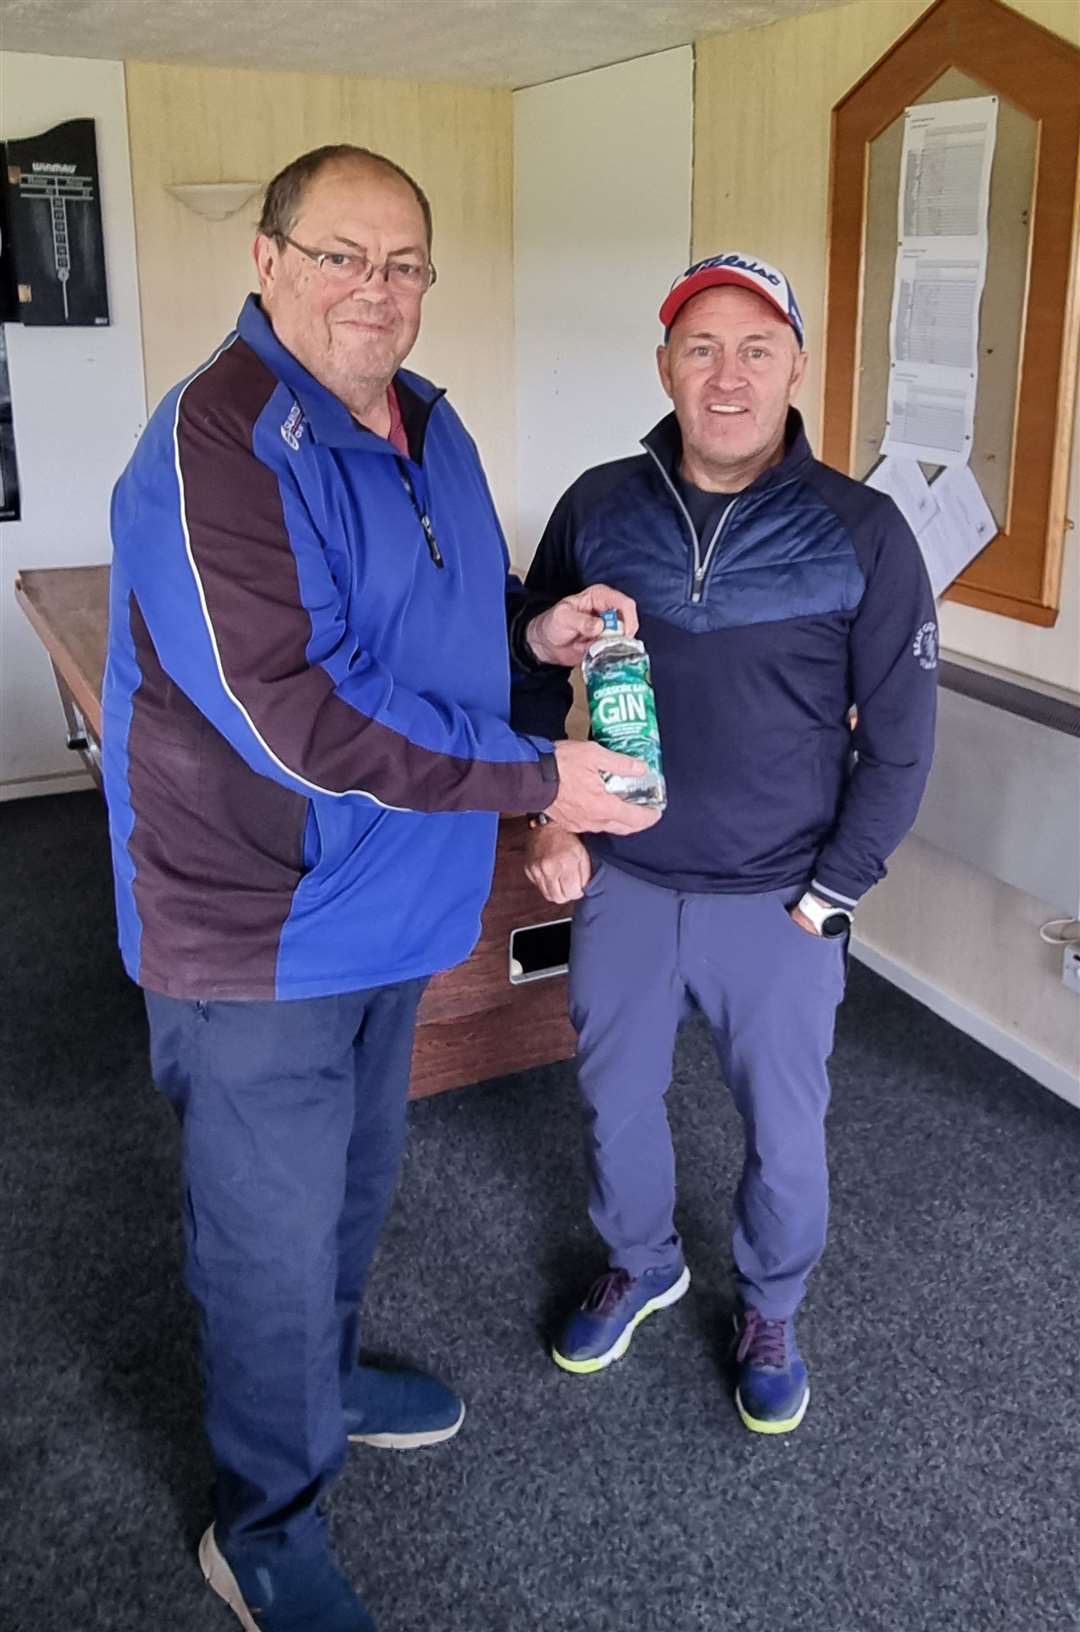 Willie Steven (right) receives a bottle of North Point gin after winning the nearest-the-pin prize in round two of the Senior Stableford competition.